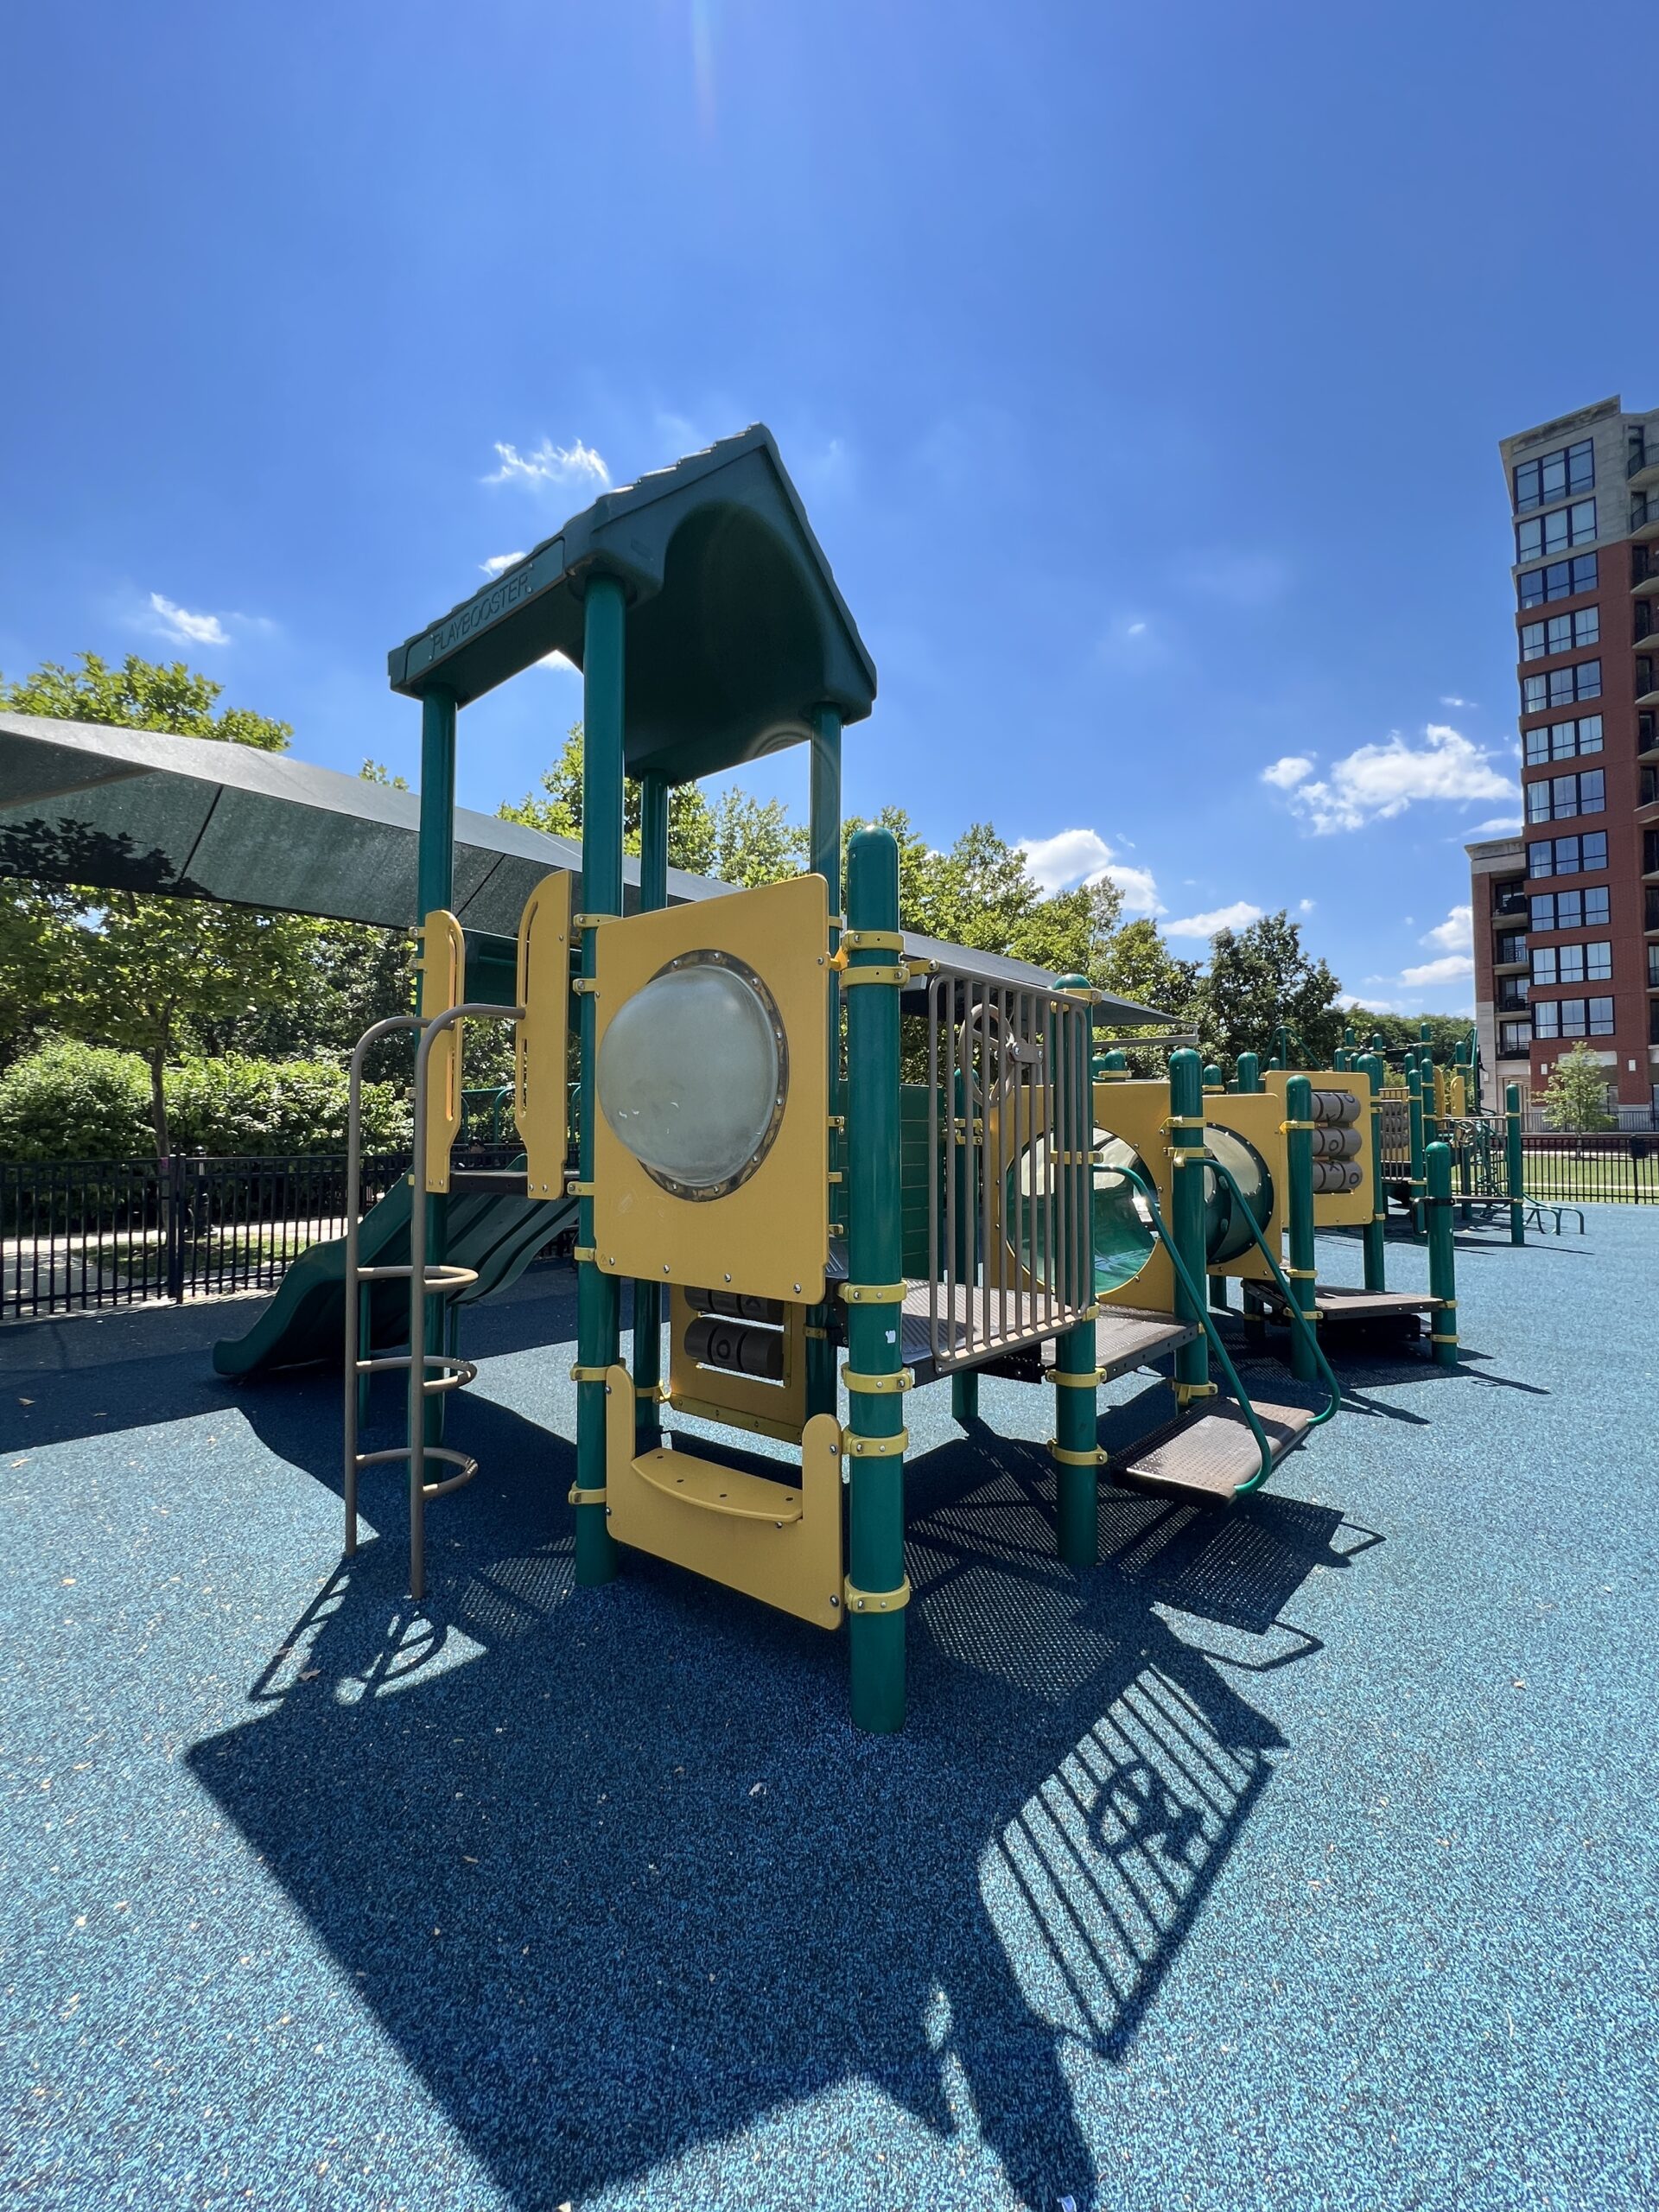 Maxwell Place Park Playground in Hoboken NJ - FEATURES - climbing ladder, shady space, tunnel